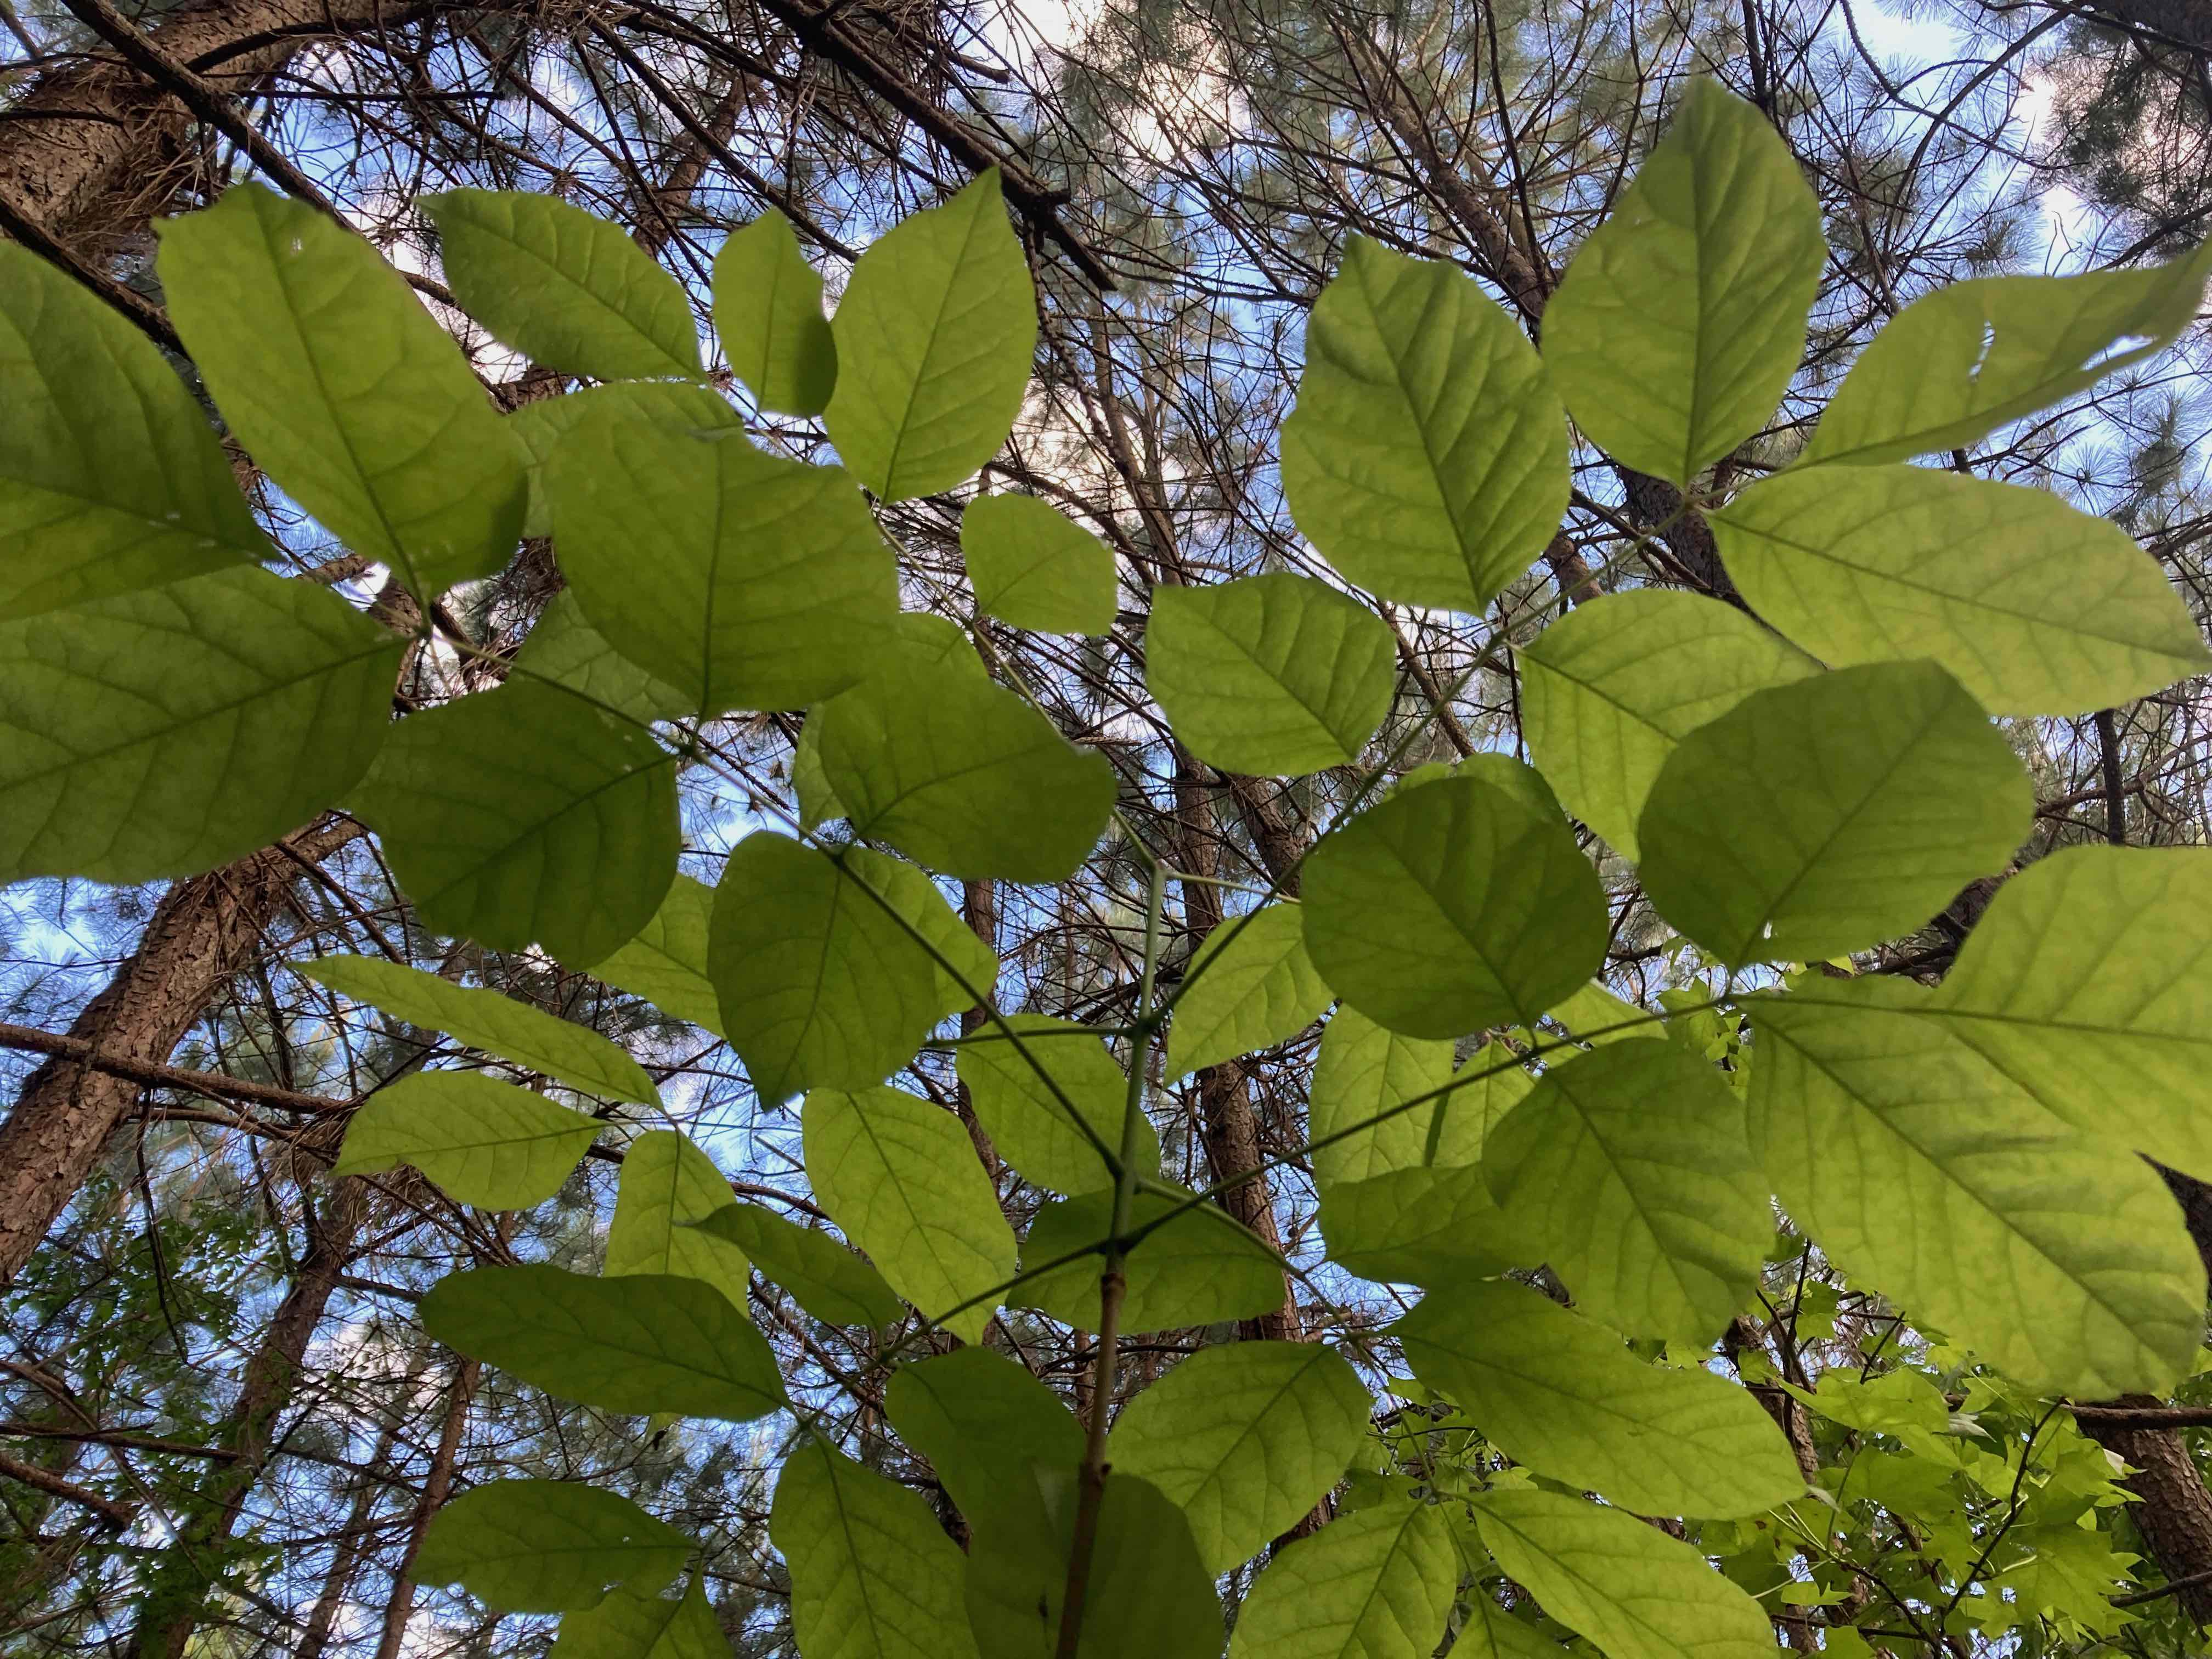 The Scientific Name is Fraxinus americana. You will likely hear them called White Ash, American Ash. This picture shows the Large opposite compound leaves. of Fraxinus americana